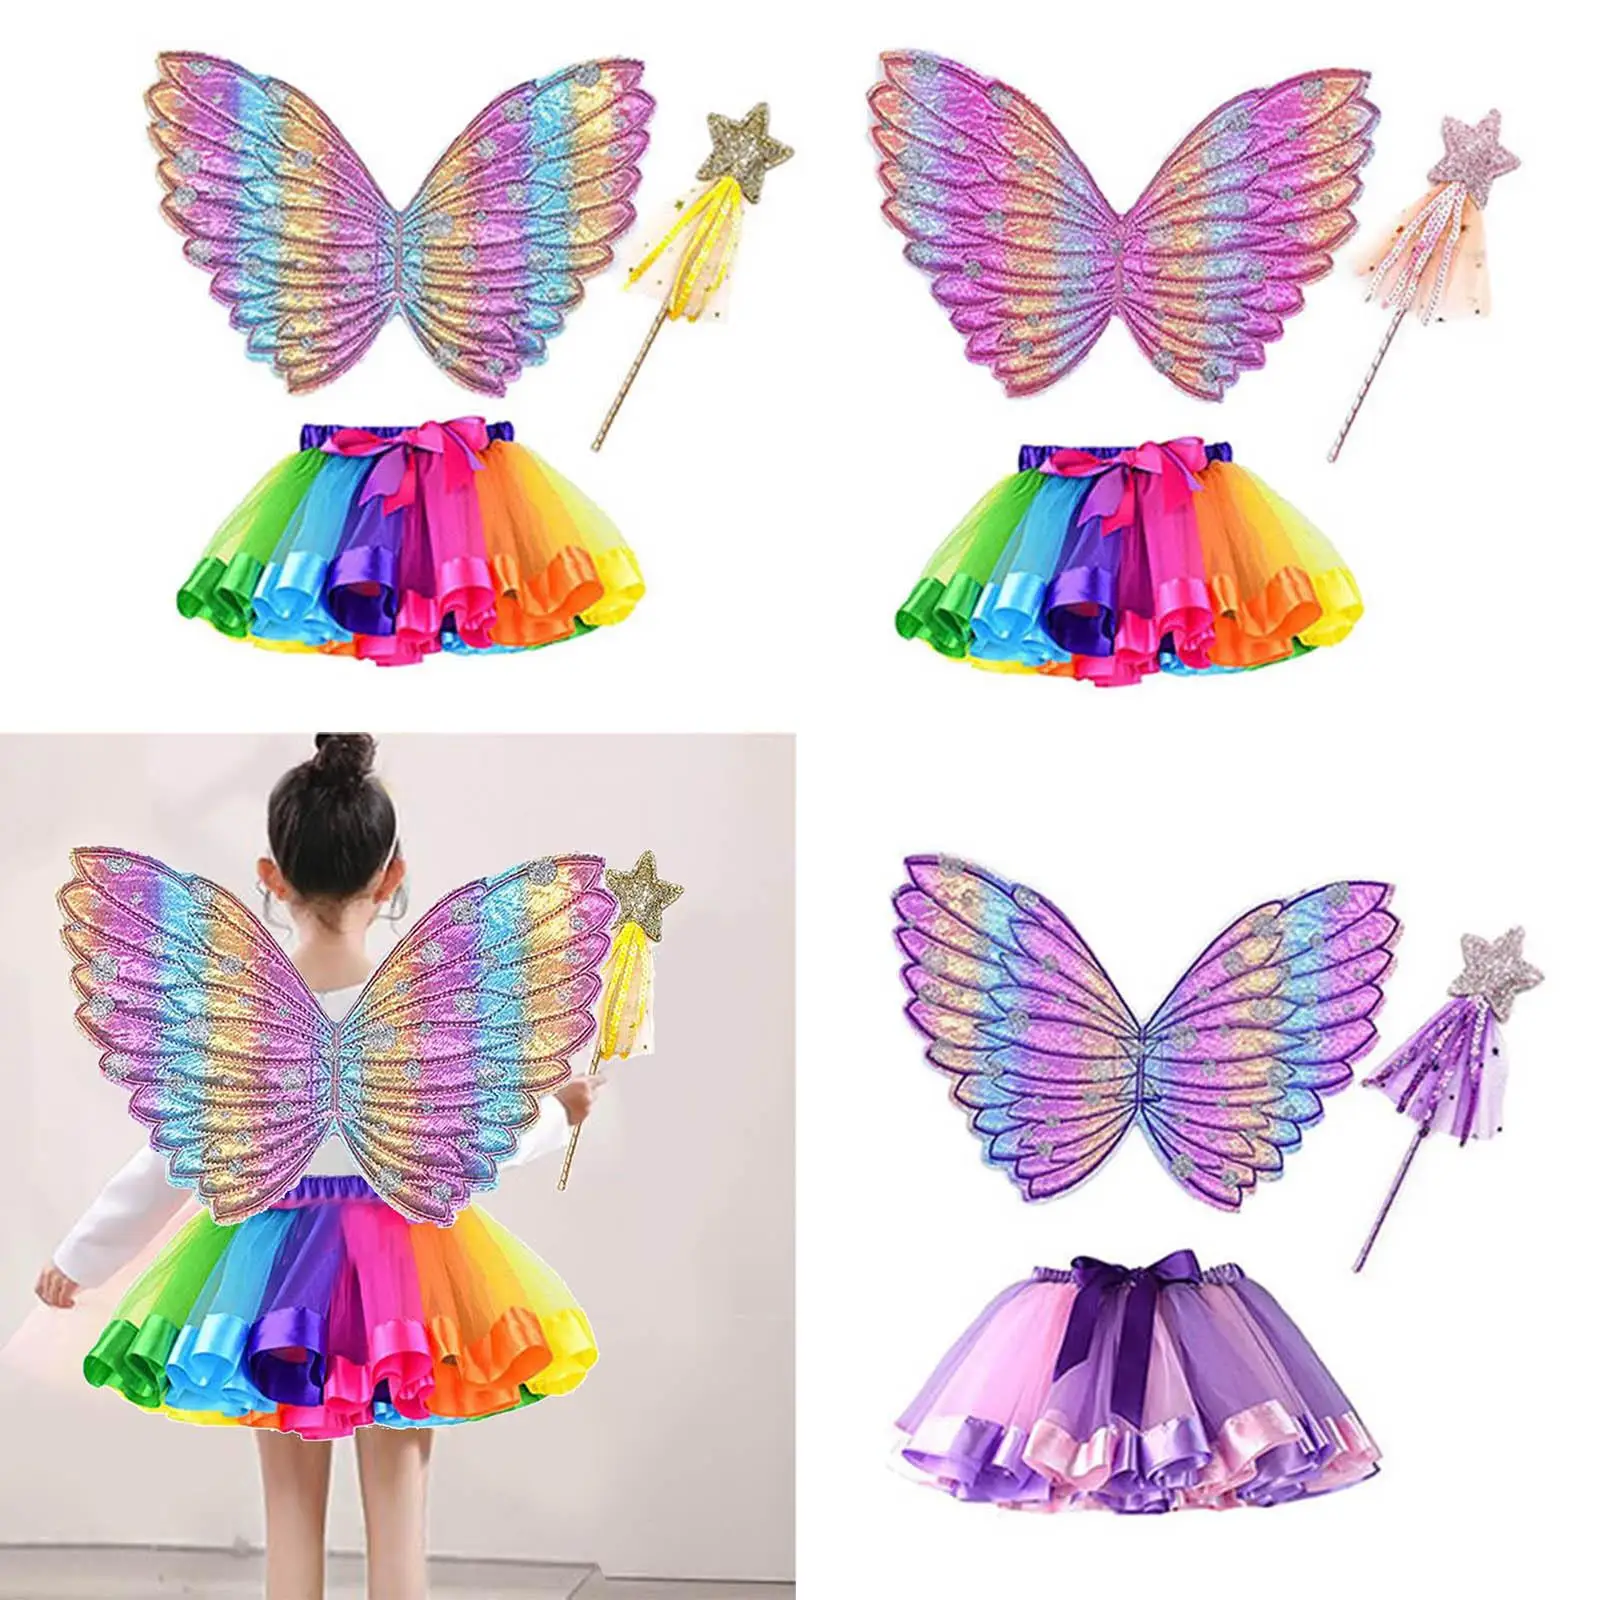 Girls Butterfly Wing Costume Dress up Fairy Children Apparel Tutu Wand Cosplay Outfit for Christmas Holiday Birthday Party